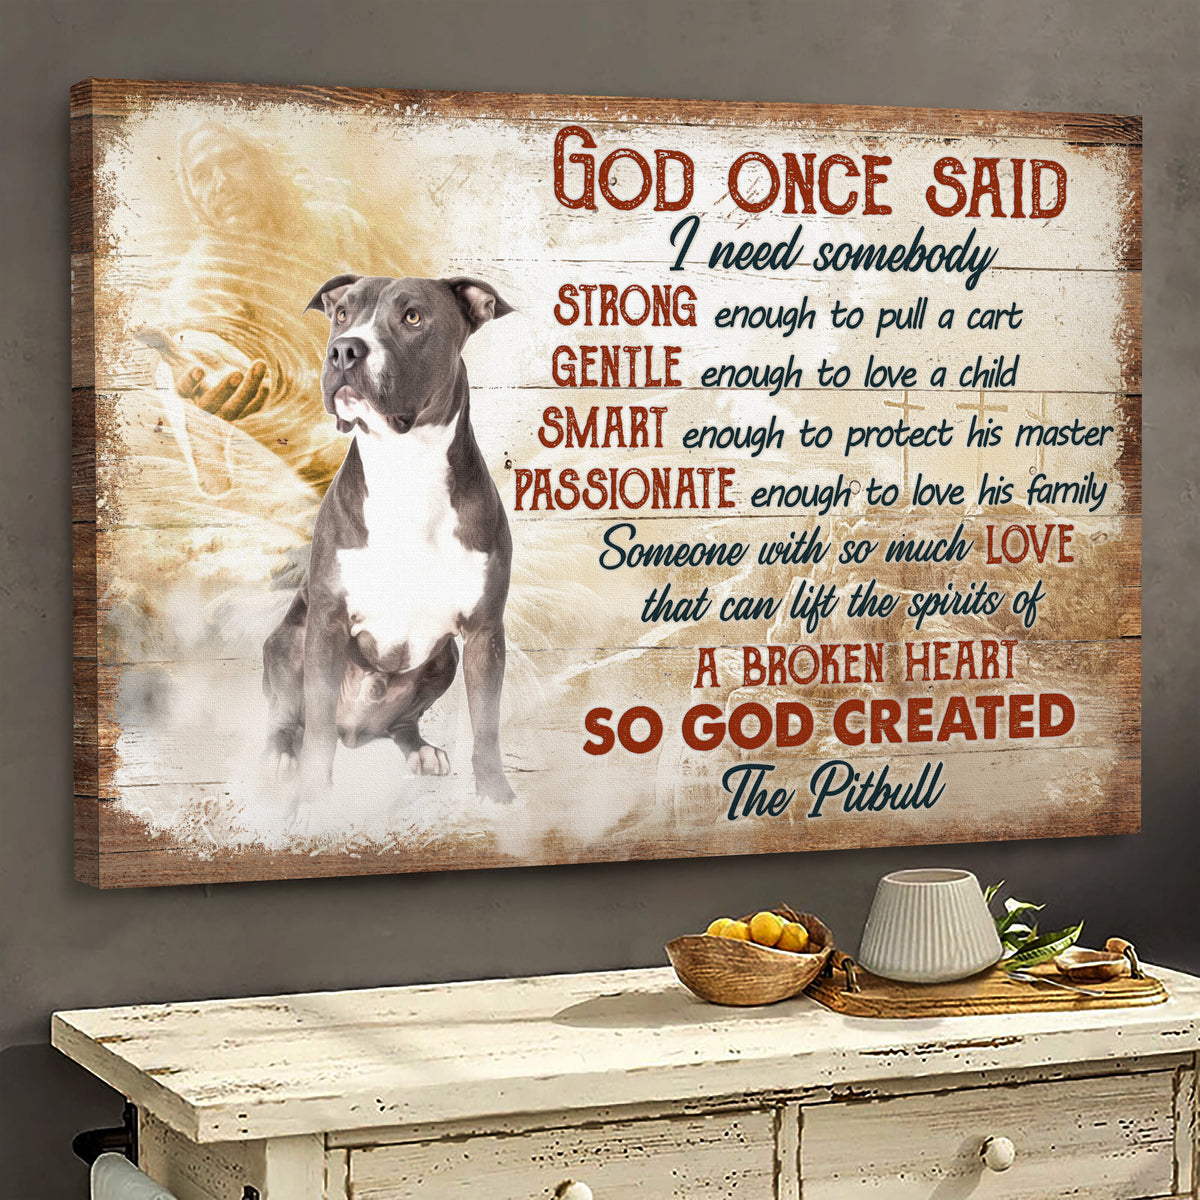 Dryving My Husband Crazy One St Pitbull At A Time Canvas Print